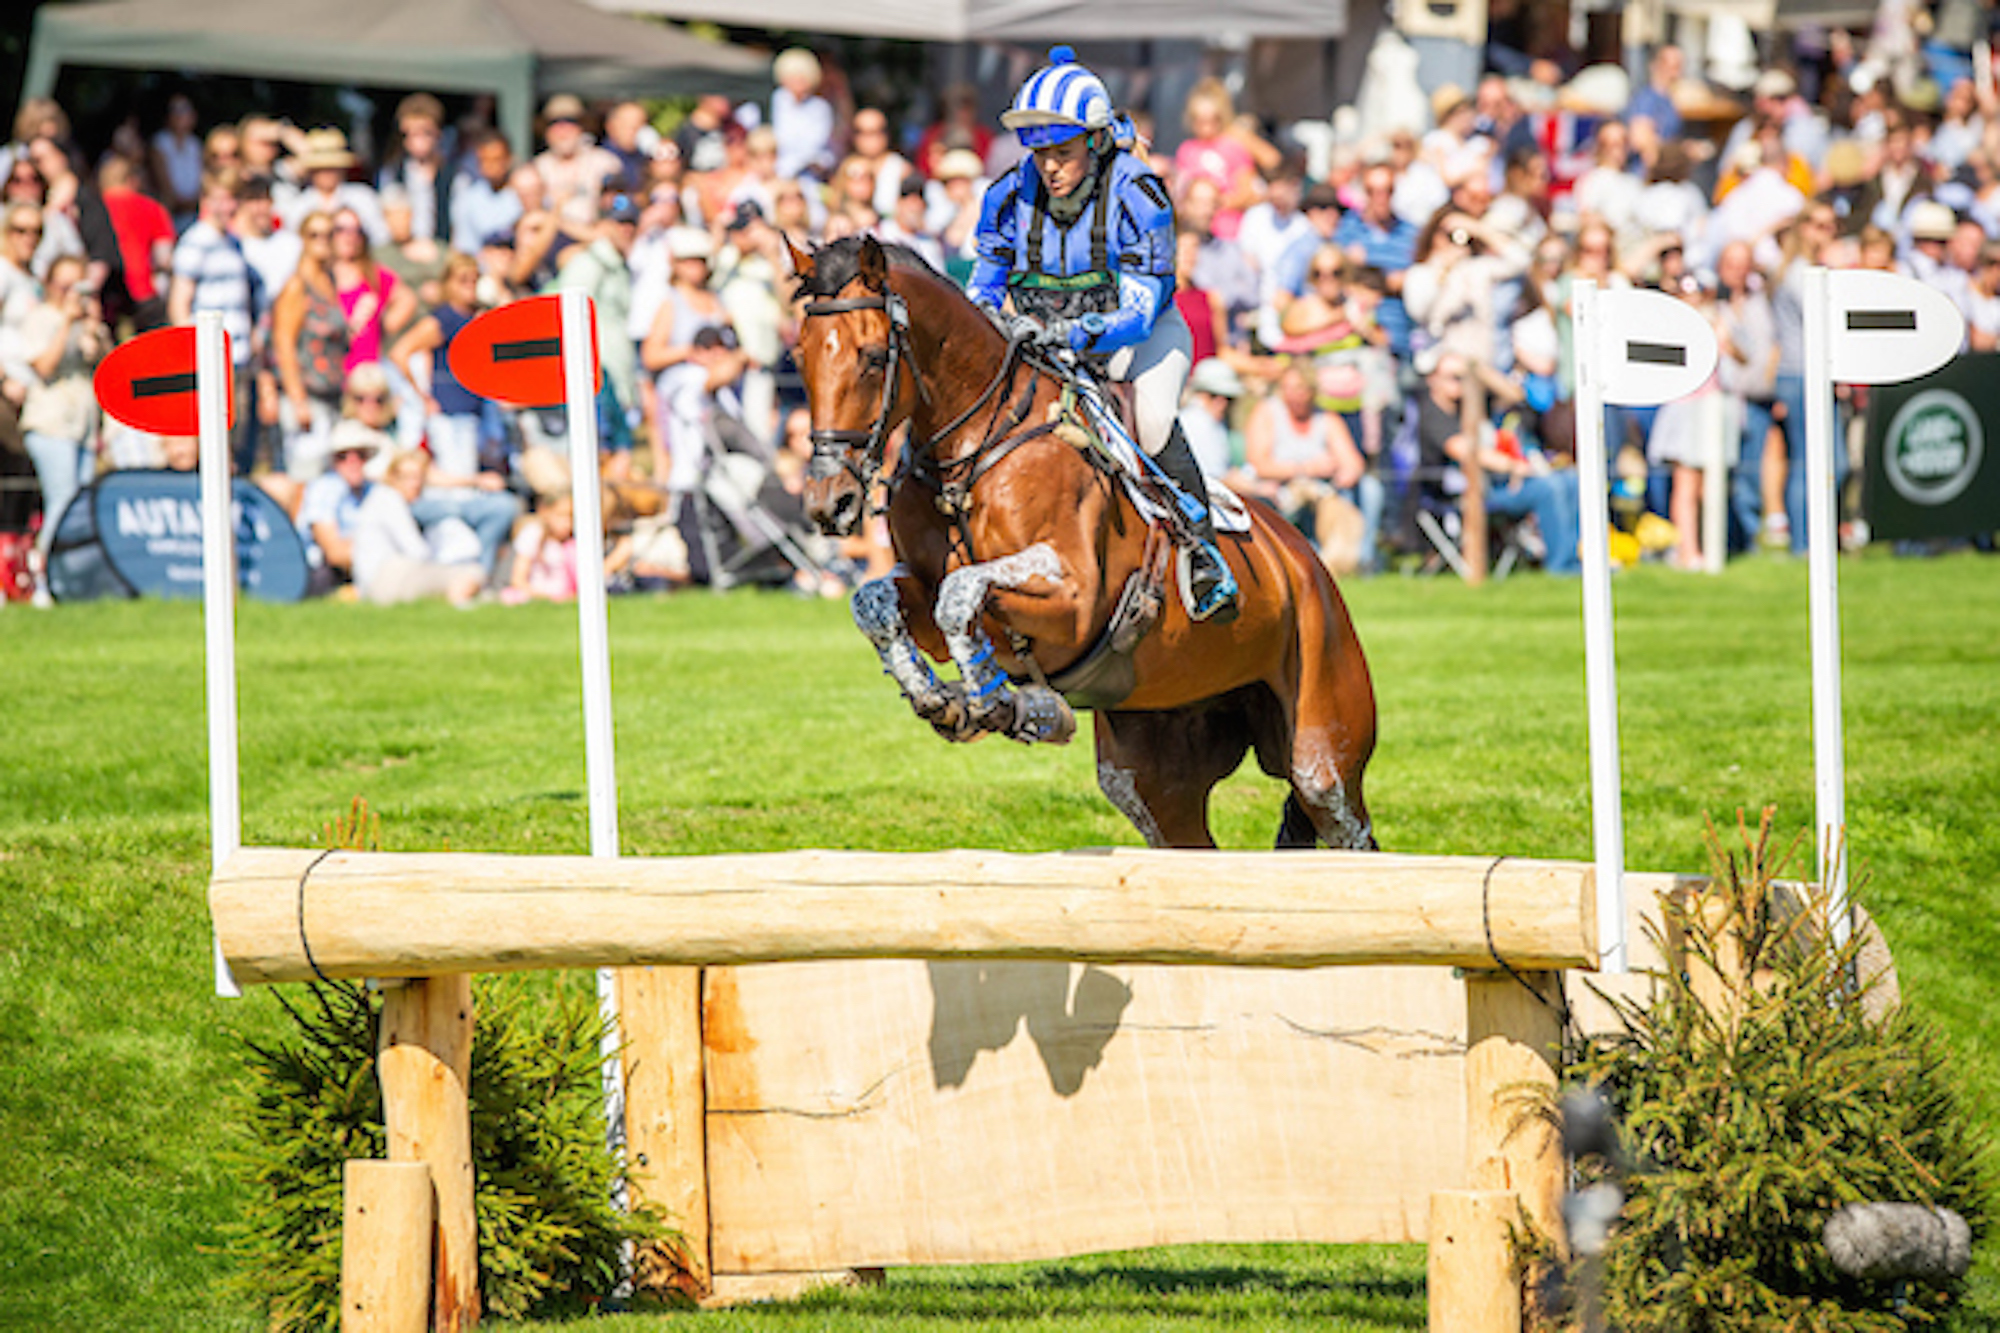 Imogen Murray: Eventing’s One to Watch